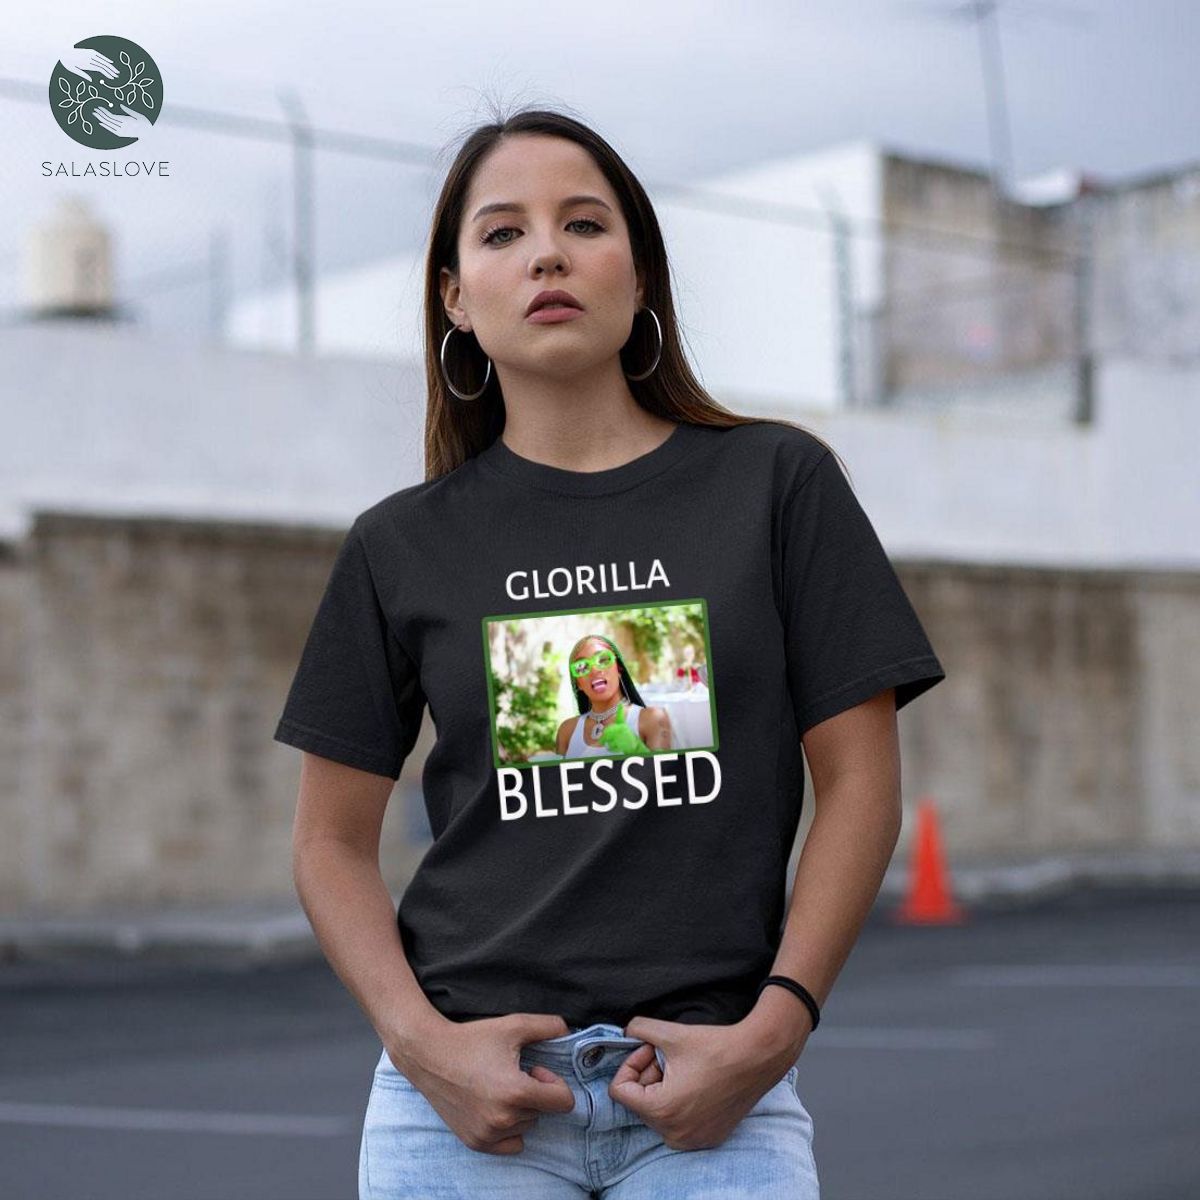 Blessed - Glorilla New Single Music Shirt For Fan